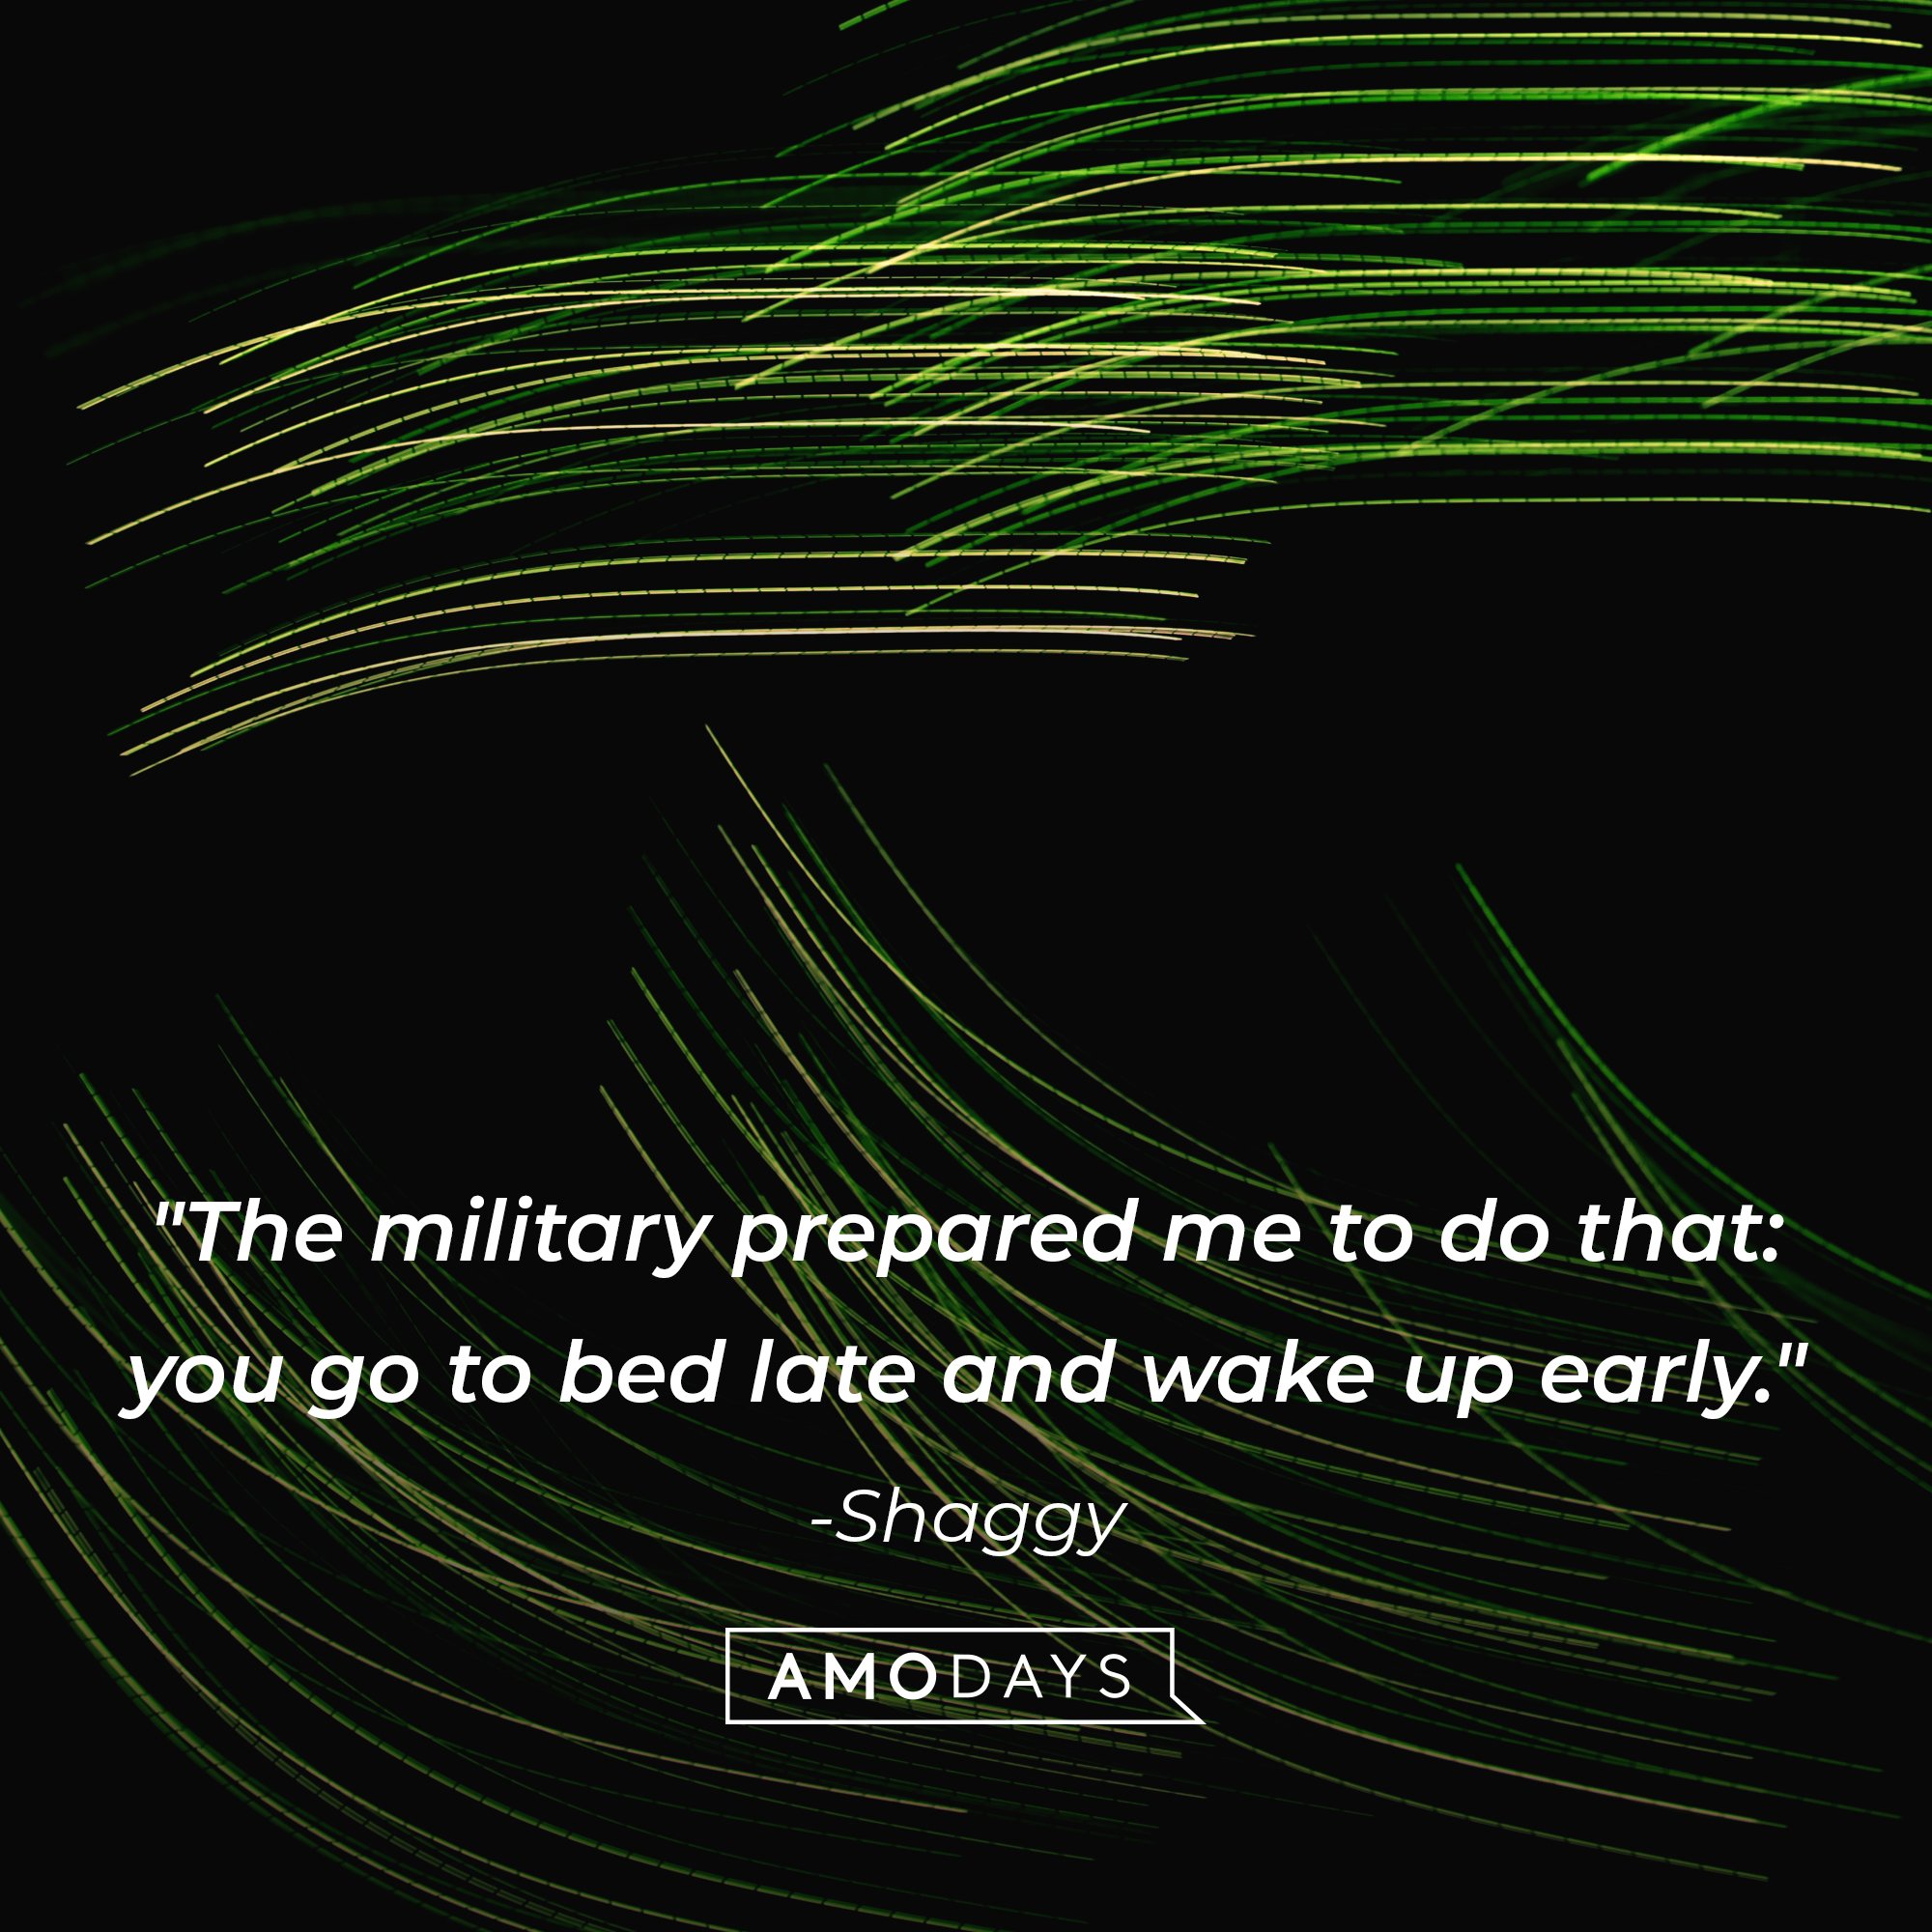 Shaggy's quote: "The military prepared me to do that: you go to bed late and wake up early." | Image: AmoDays